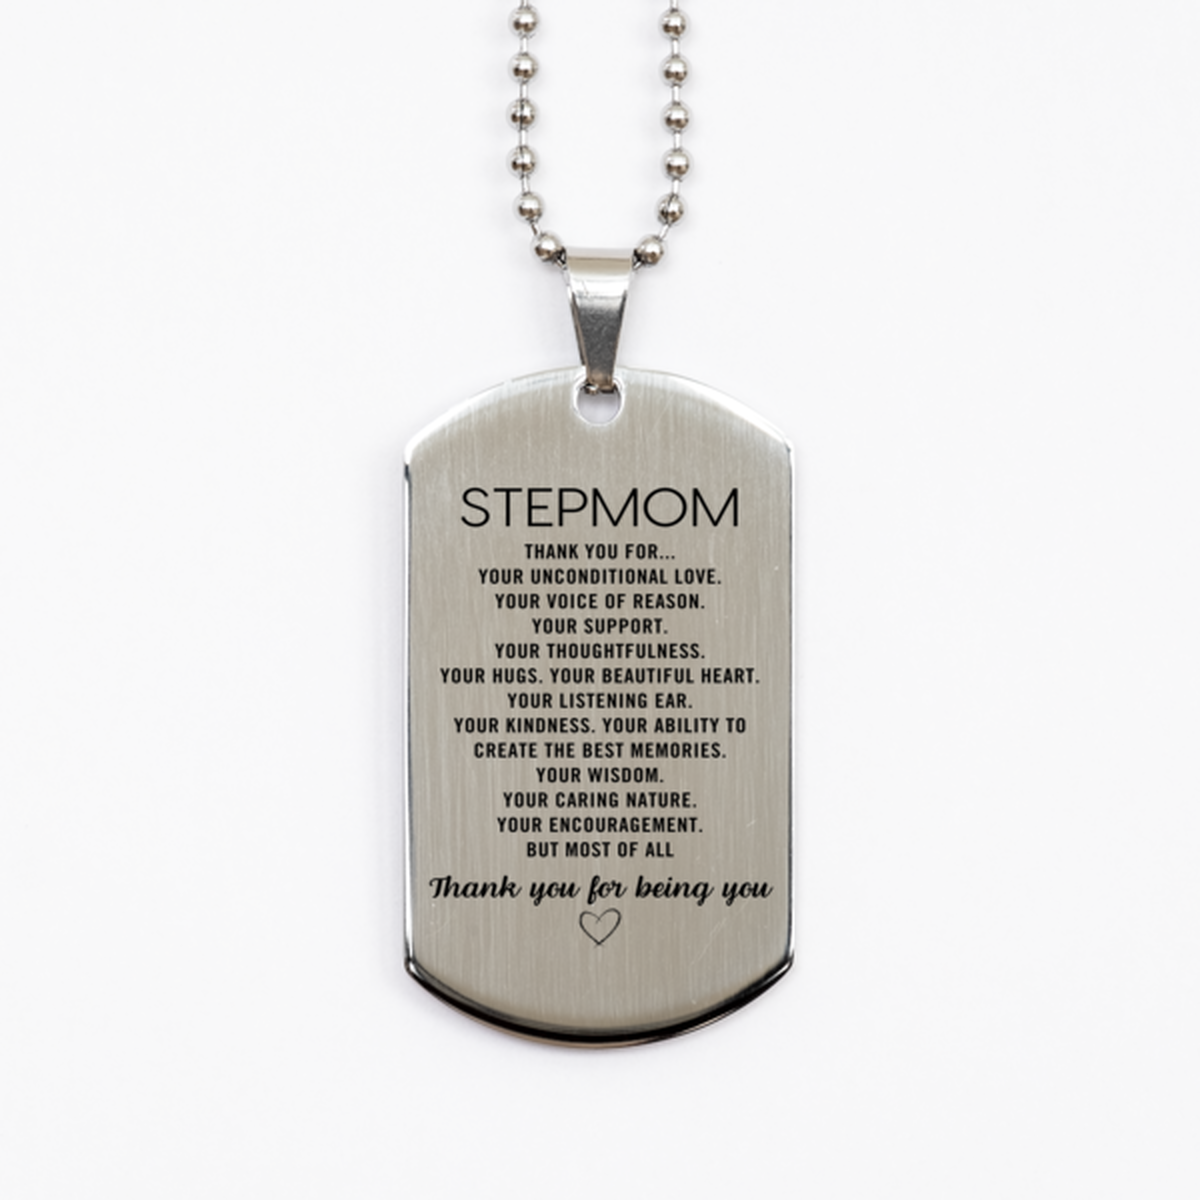 Stepmom Silver Dog Tag Custom, Engraved Gifts For Stepmom Christmas Graduation Birthday Gifts for Men Women Stepmom Thank you for Your unconditional love